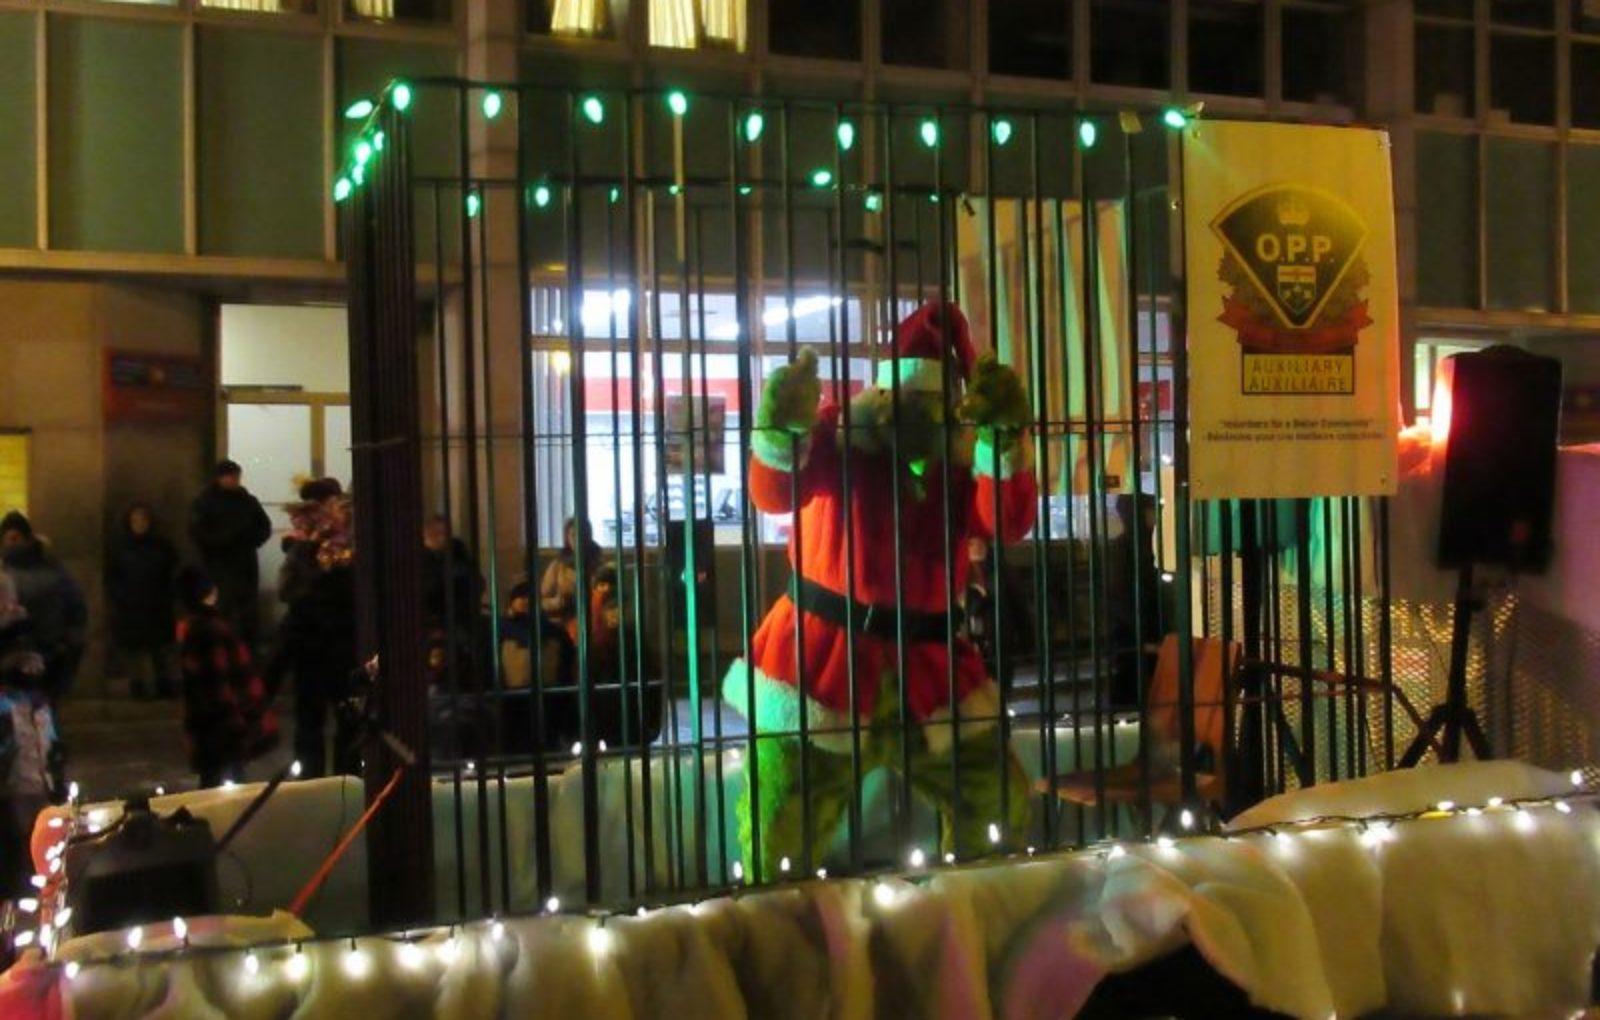 The Grinch in jail